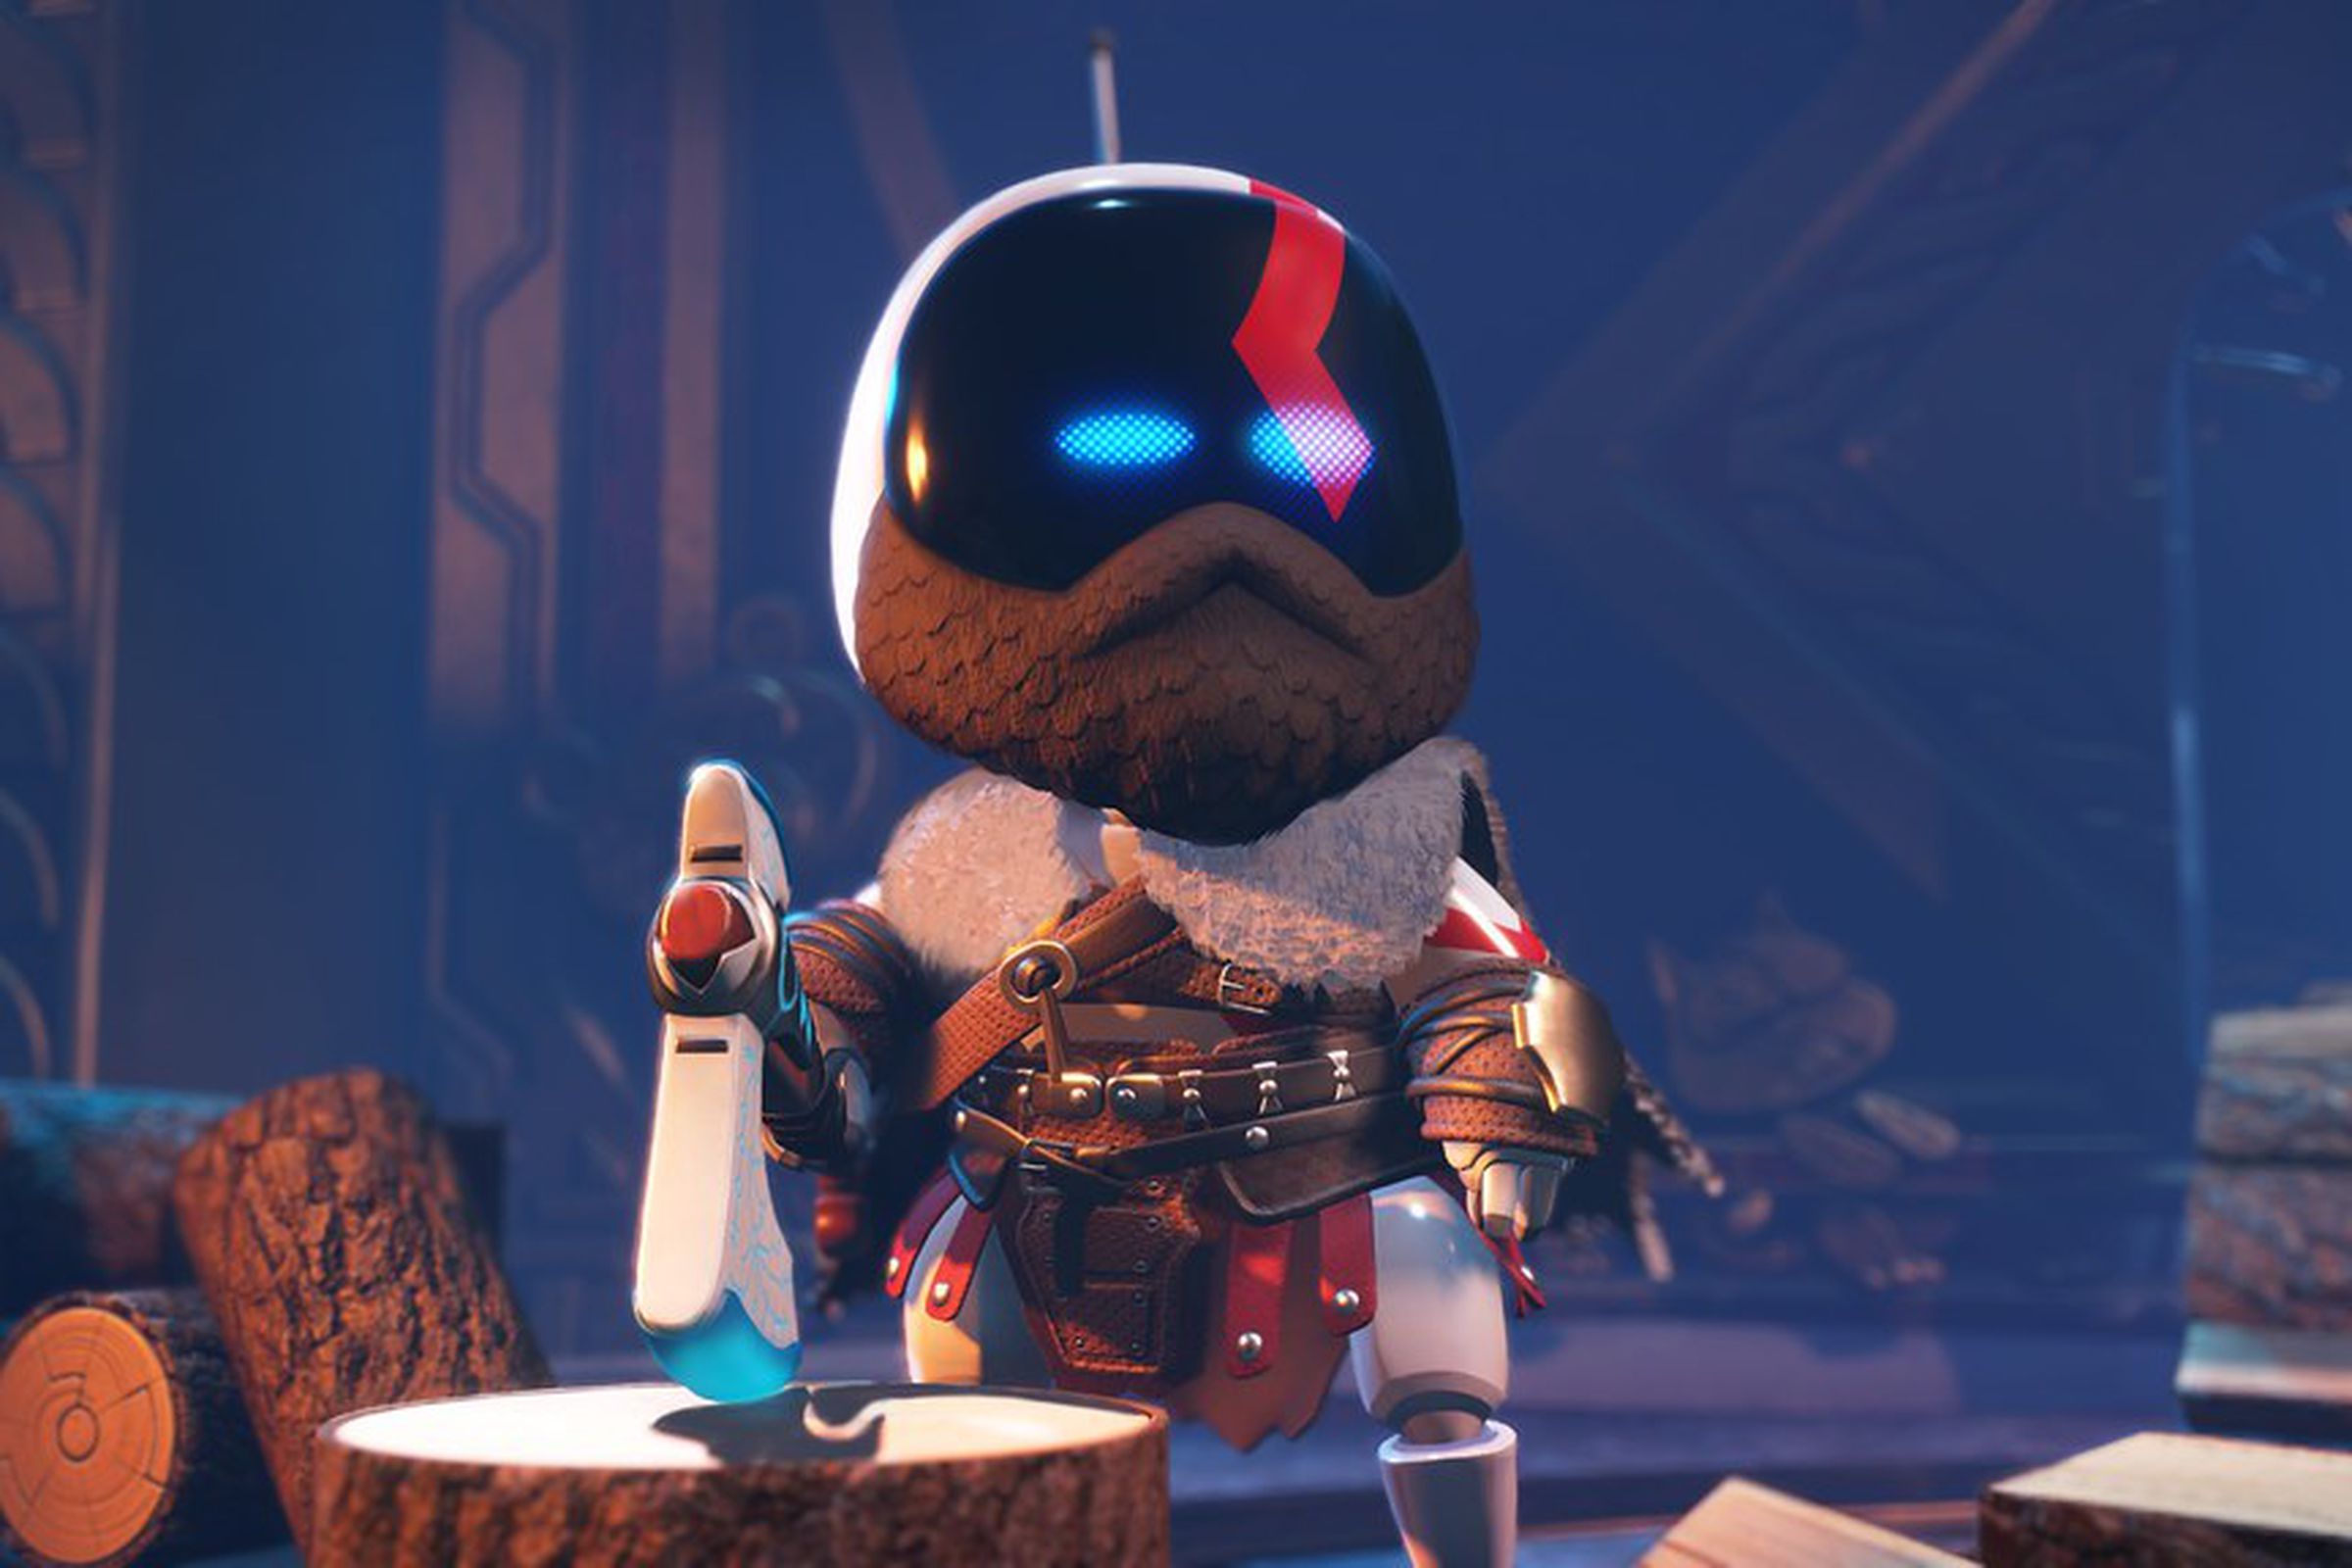 A screenshot from the video game Astro Bot.